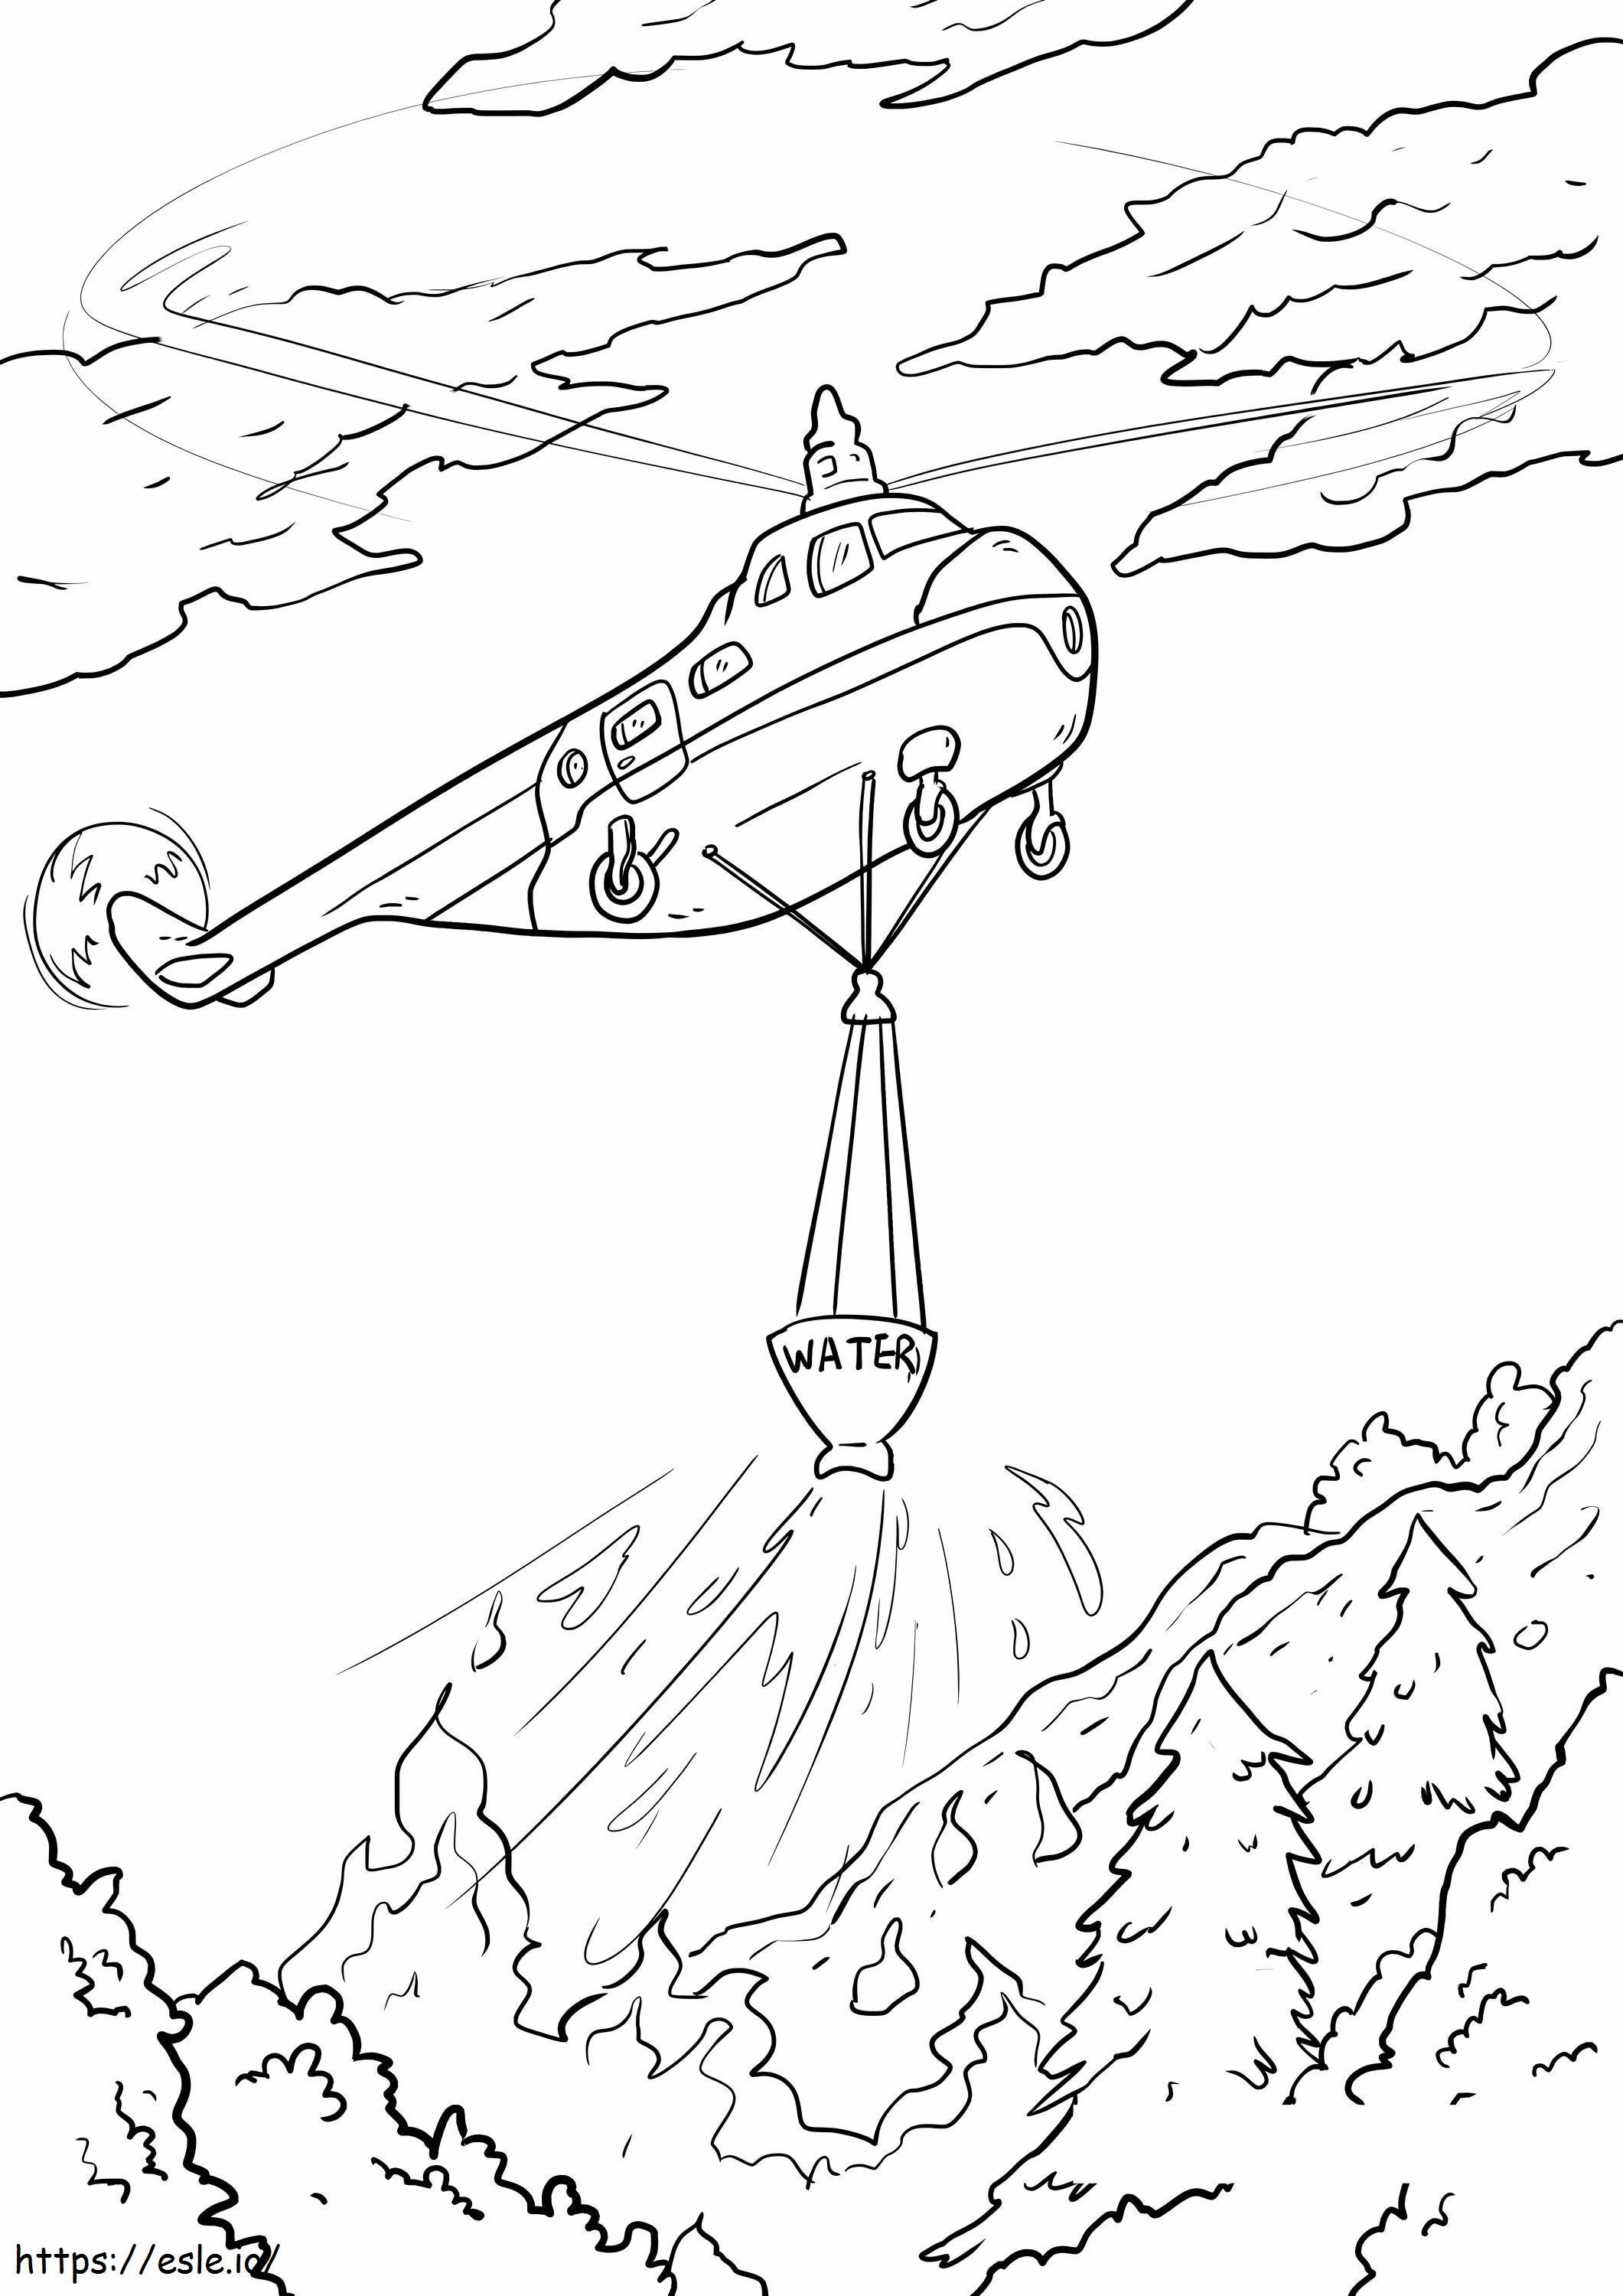 Firefighter Helicopter coloring page